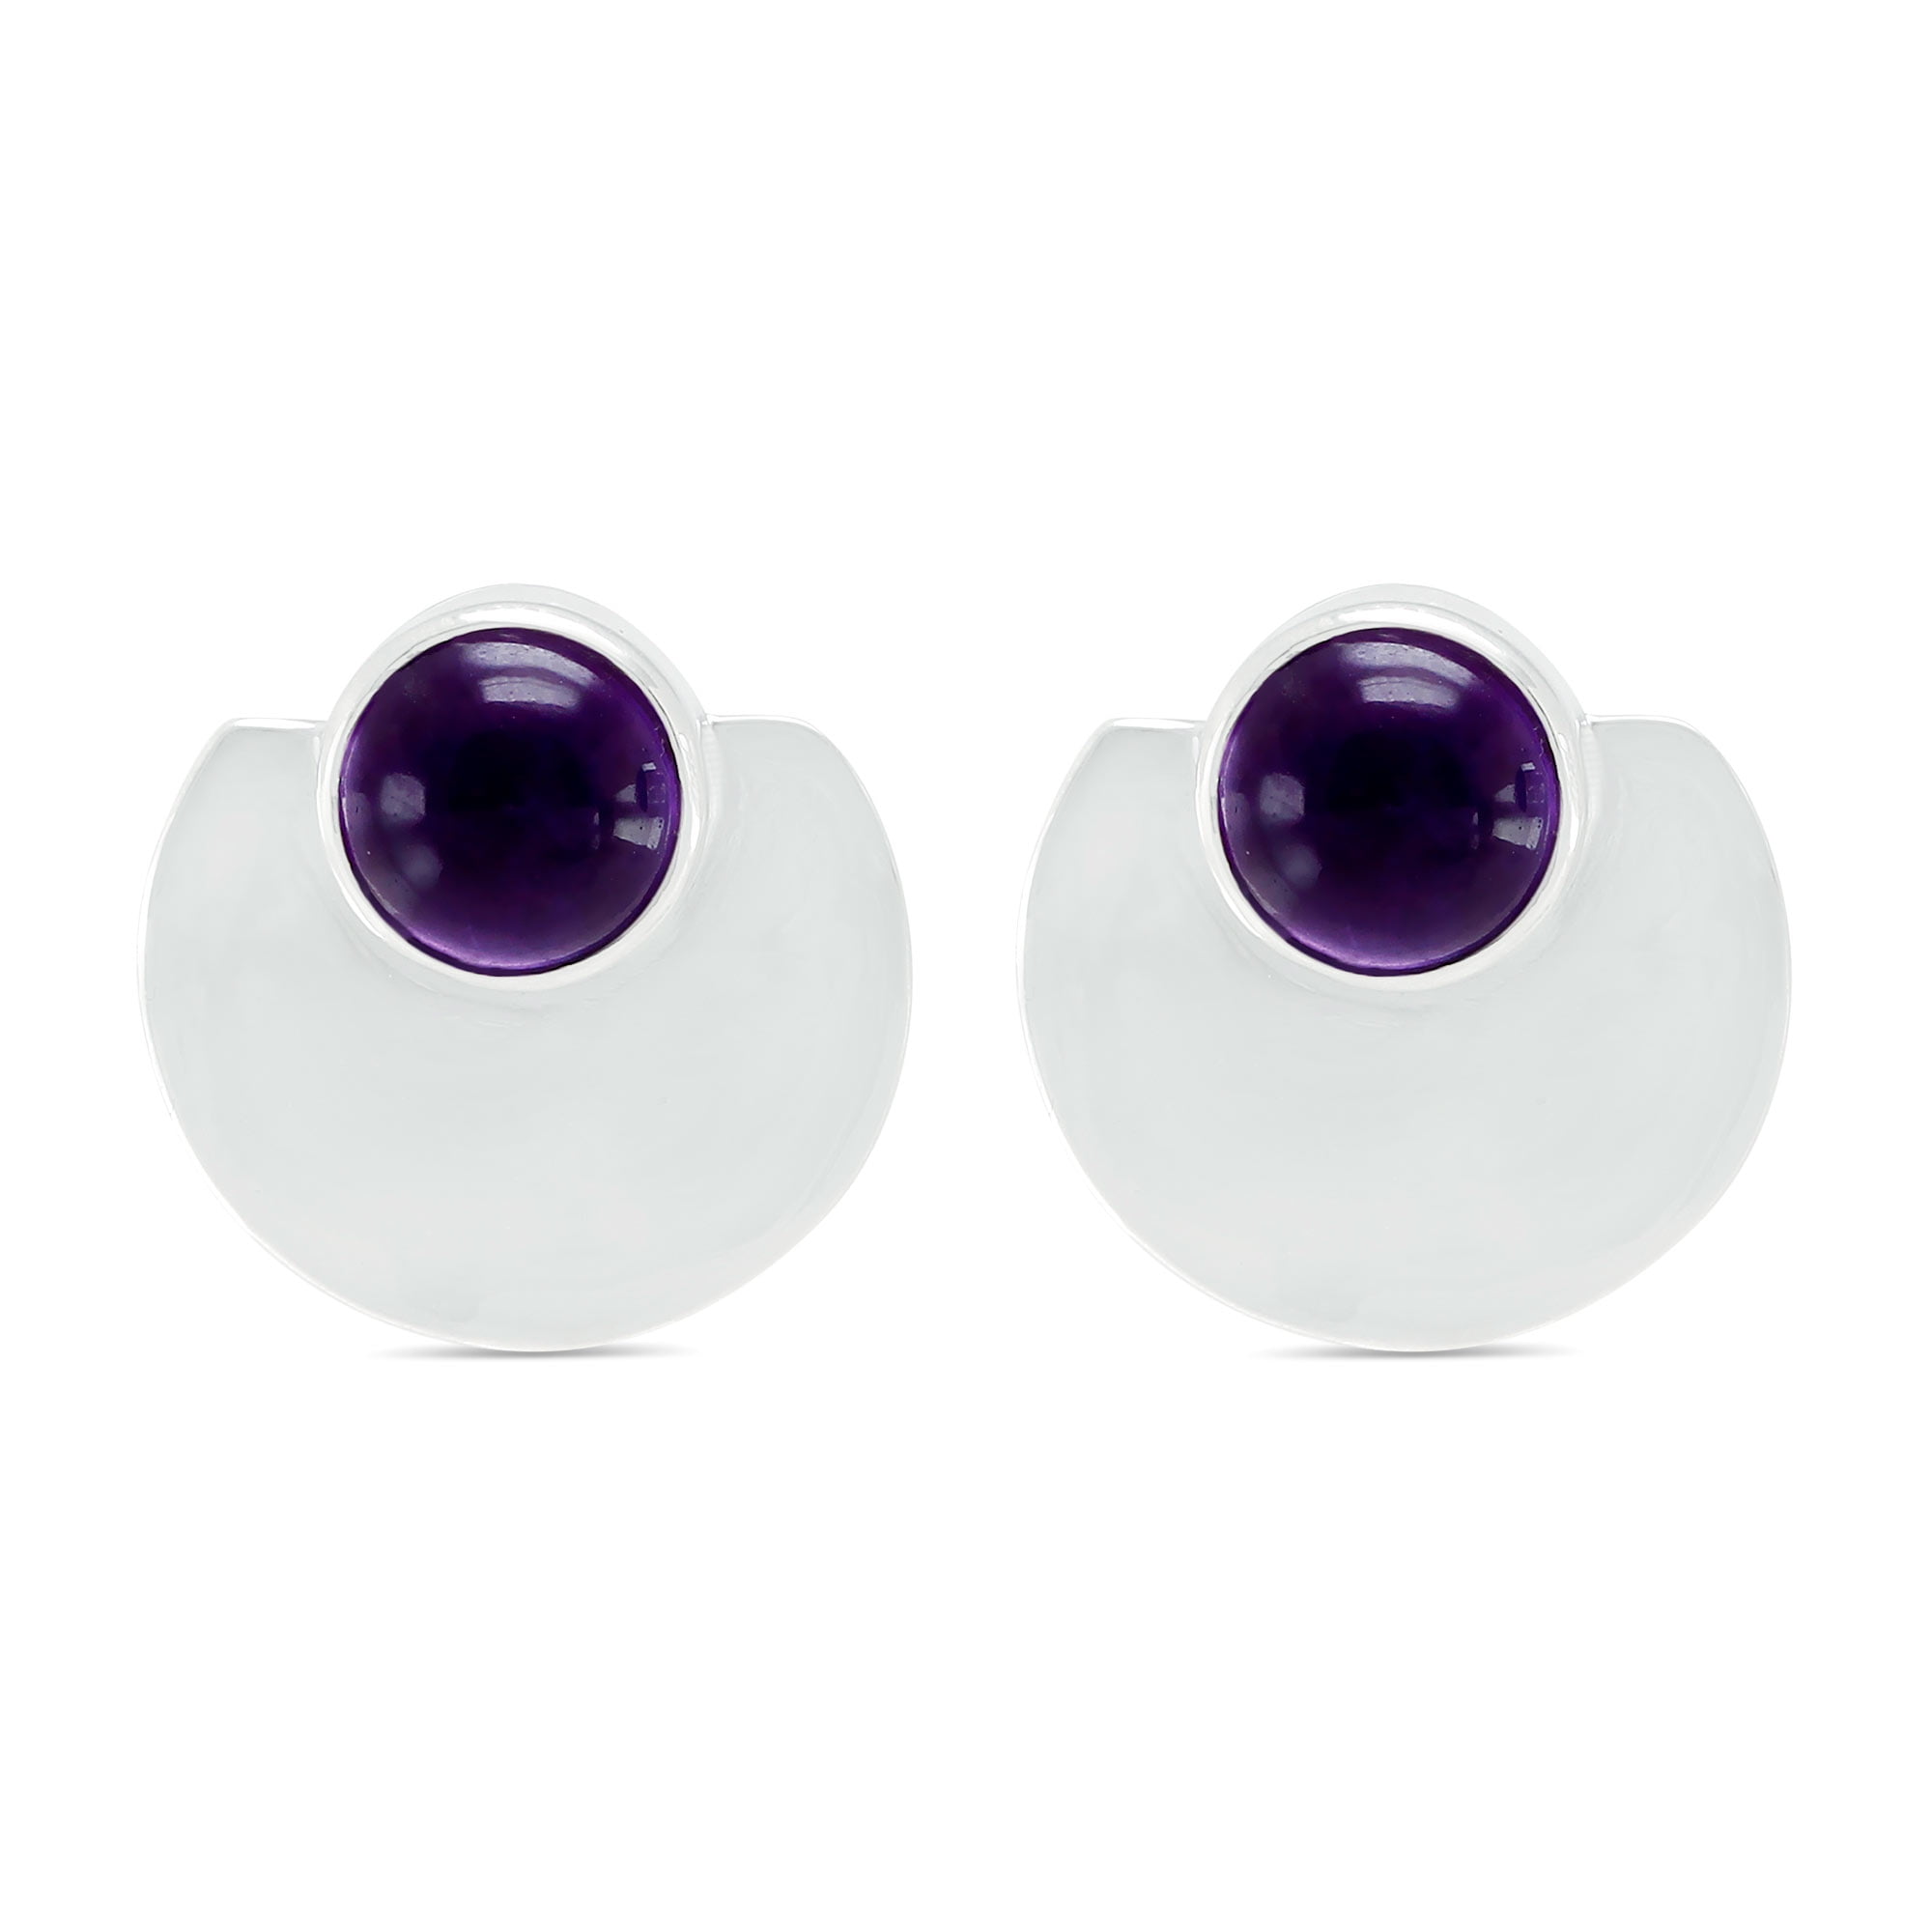 Solitaire Stud Earrings 14K White Gold Over .925 Sterling Silver SVC-JEWELS 3.50 CT Round Cut Amethyst 7MM